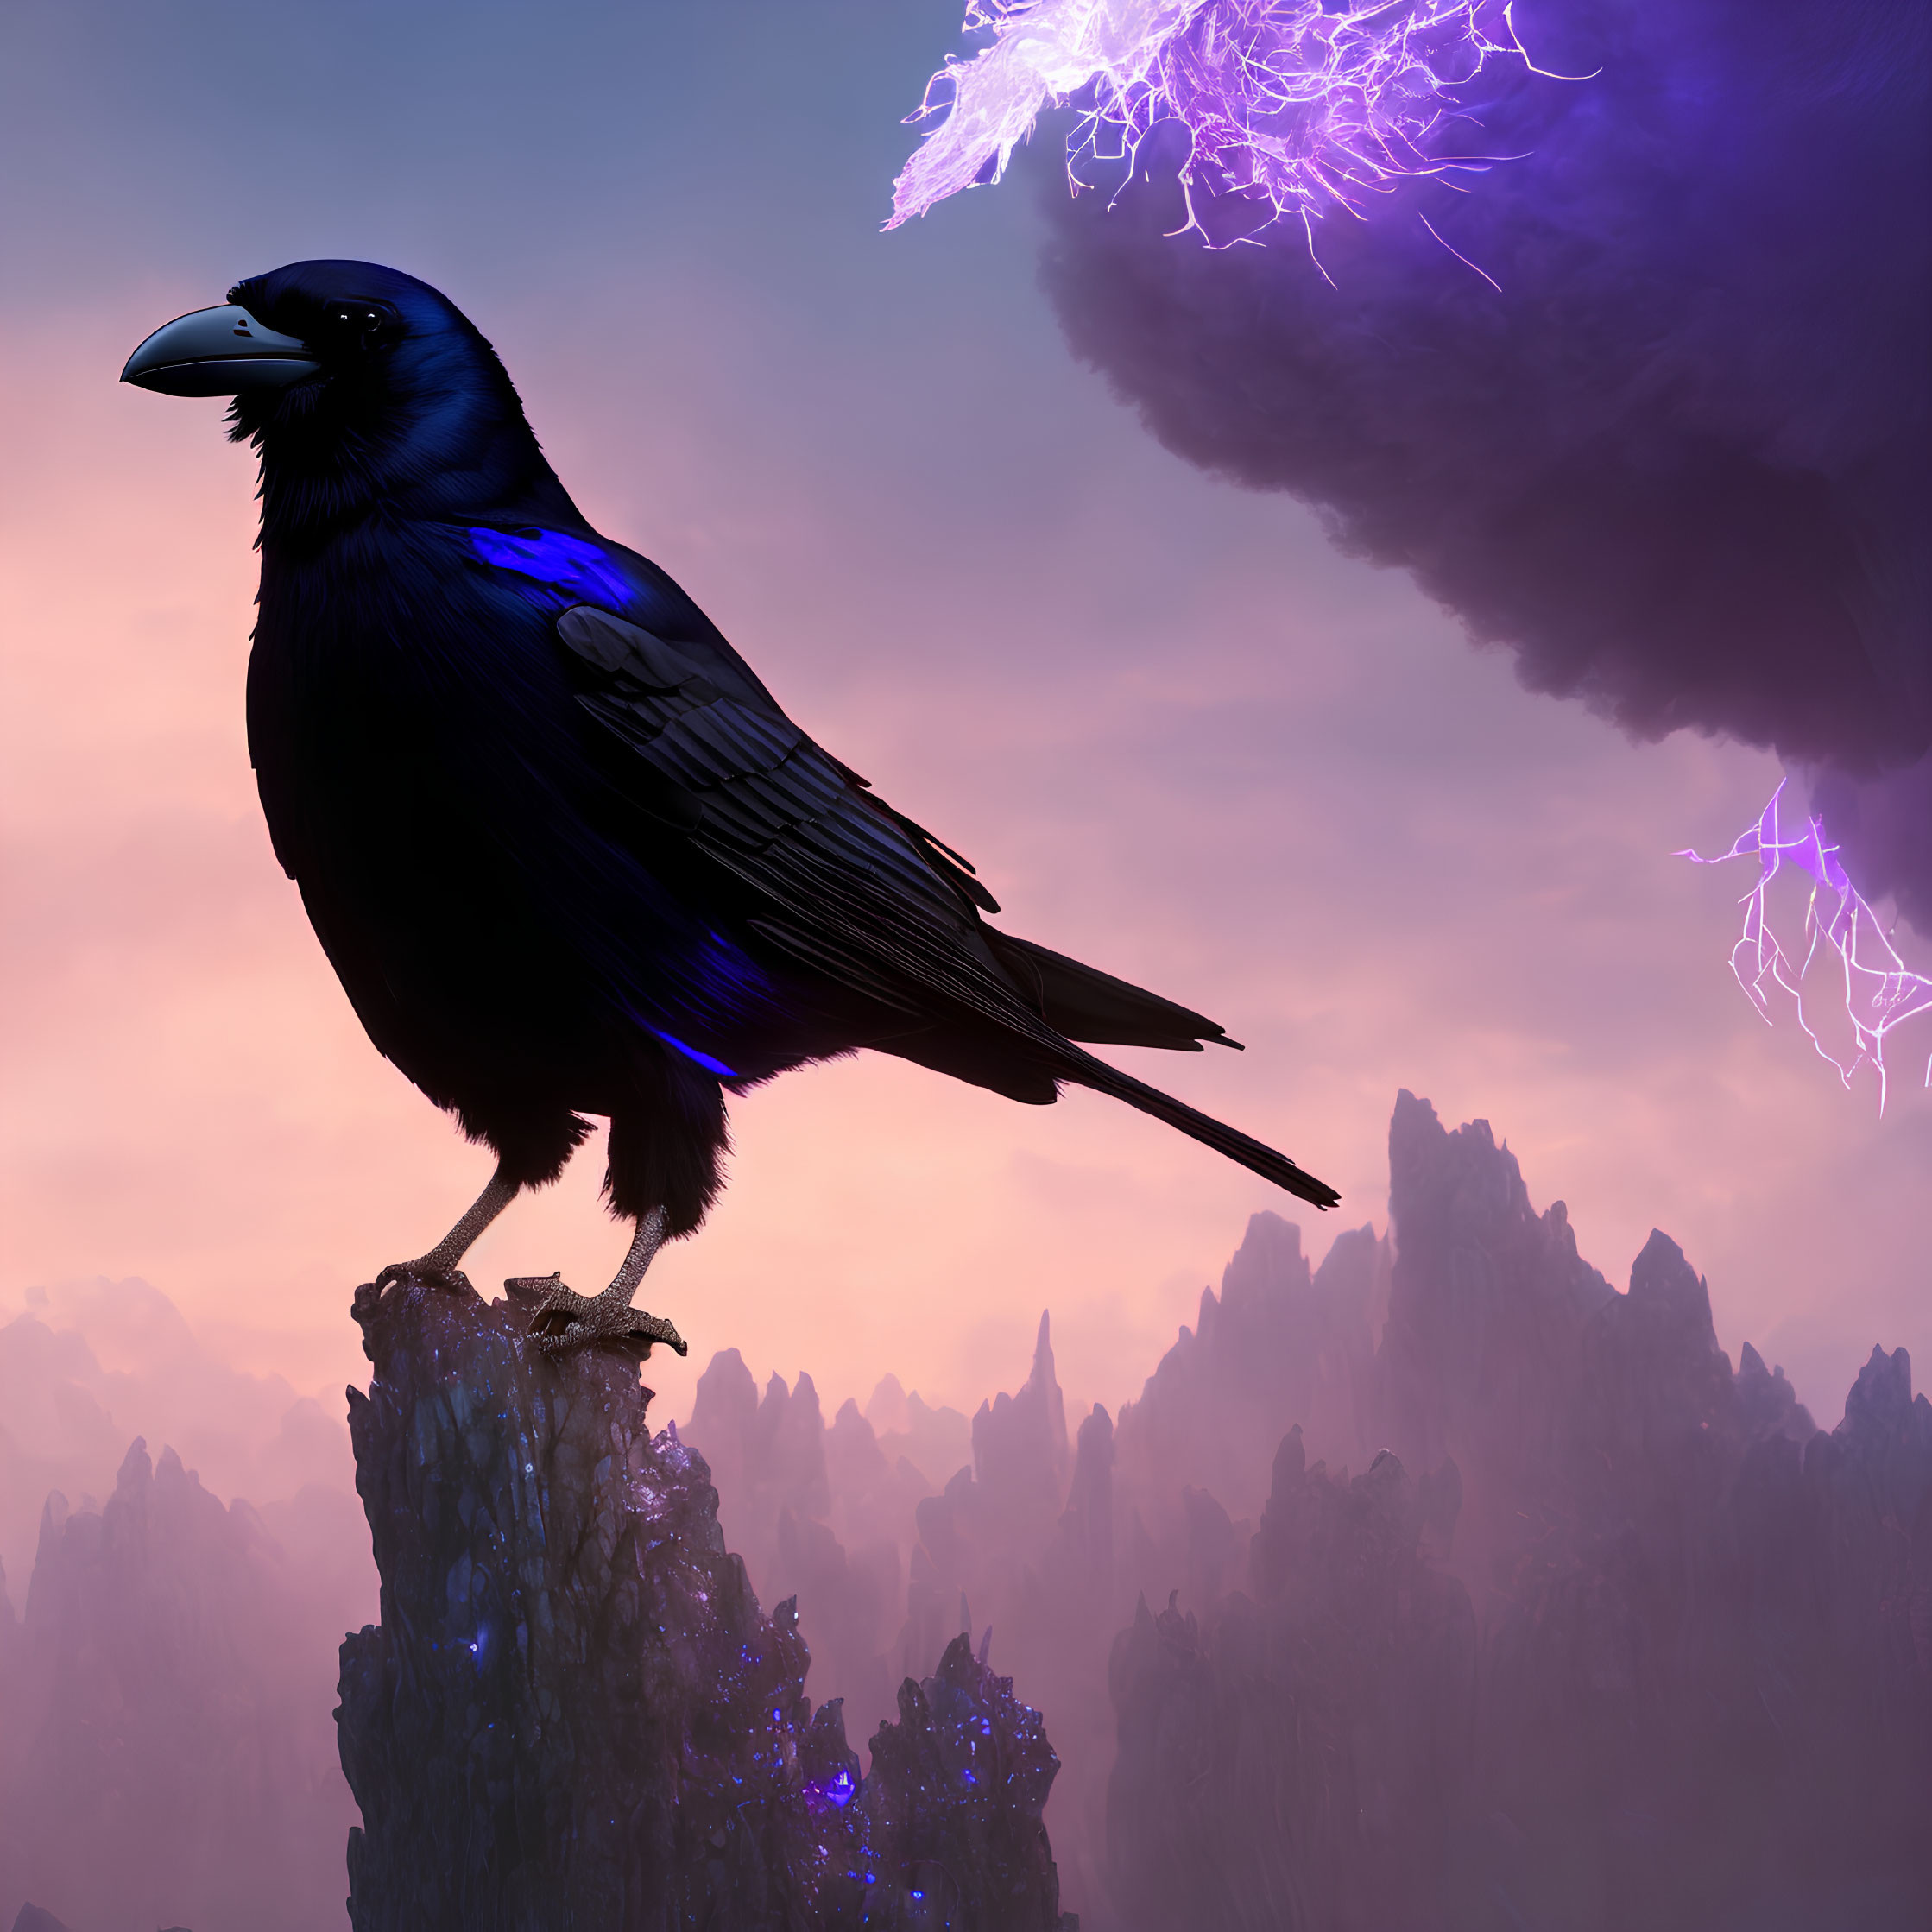 Crow perched on craggy peak under purple skies with lightning.